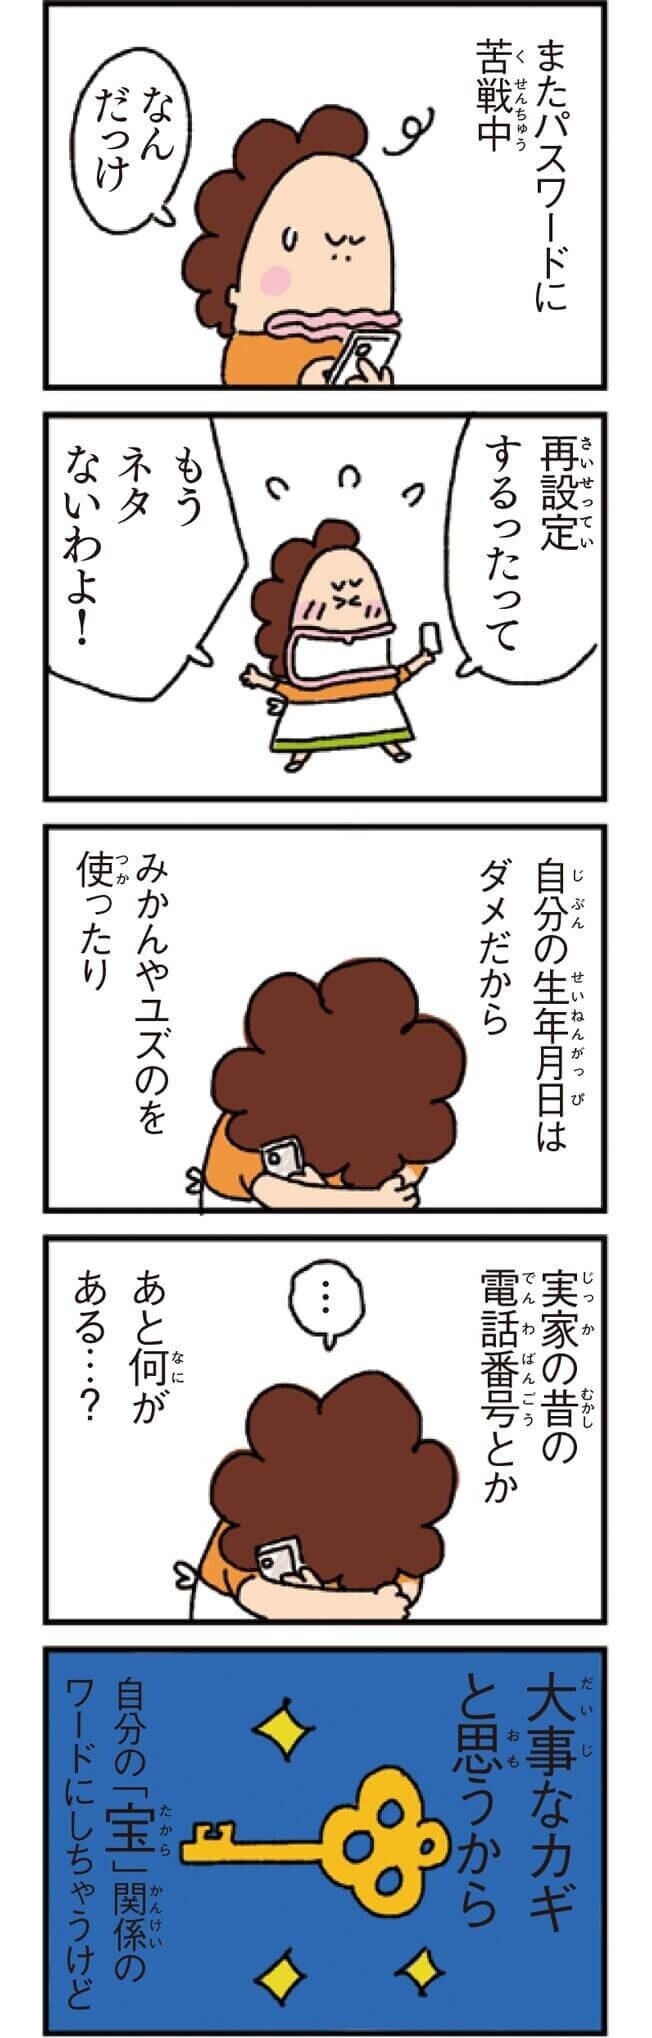 noteあたしンち#43-1